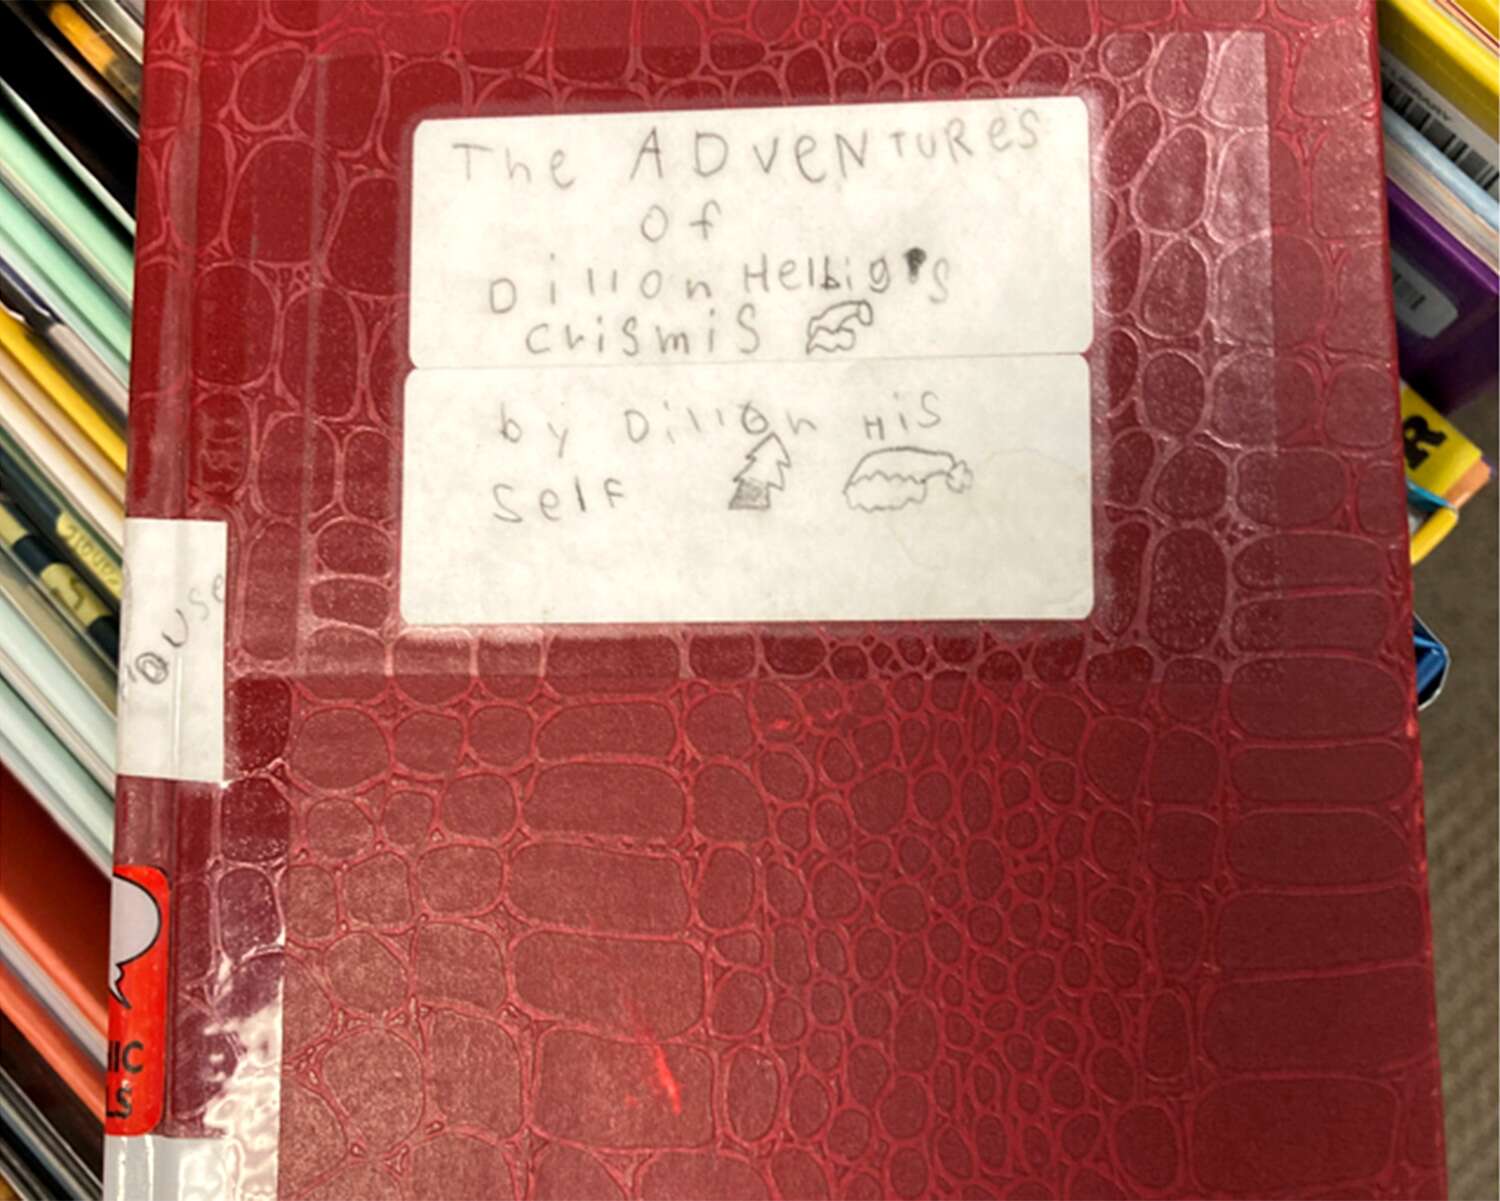 Second Grader Sneaked His Handwritten Book To A Library, It’s A Hit